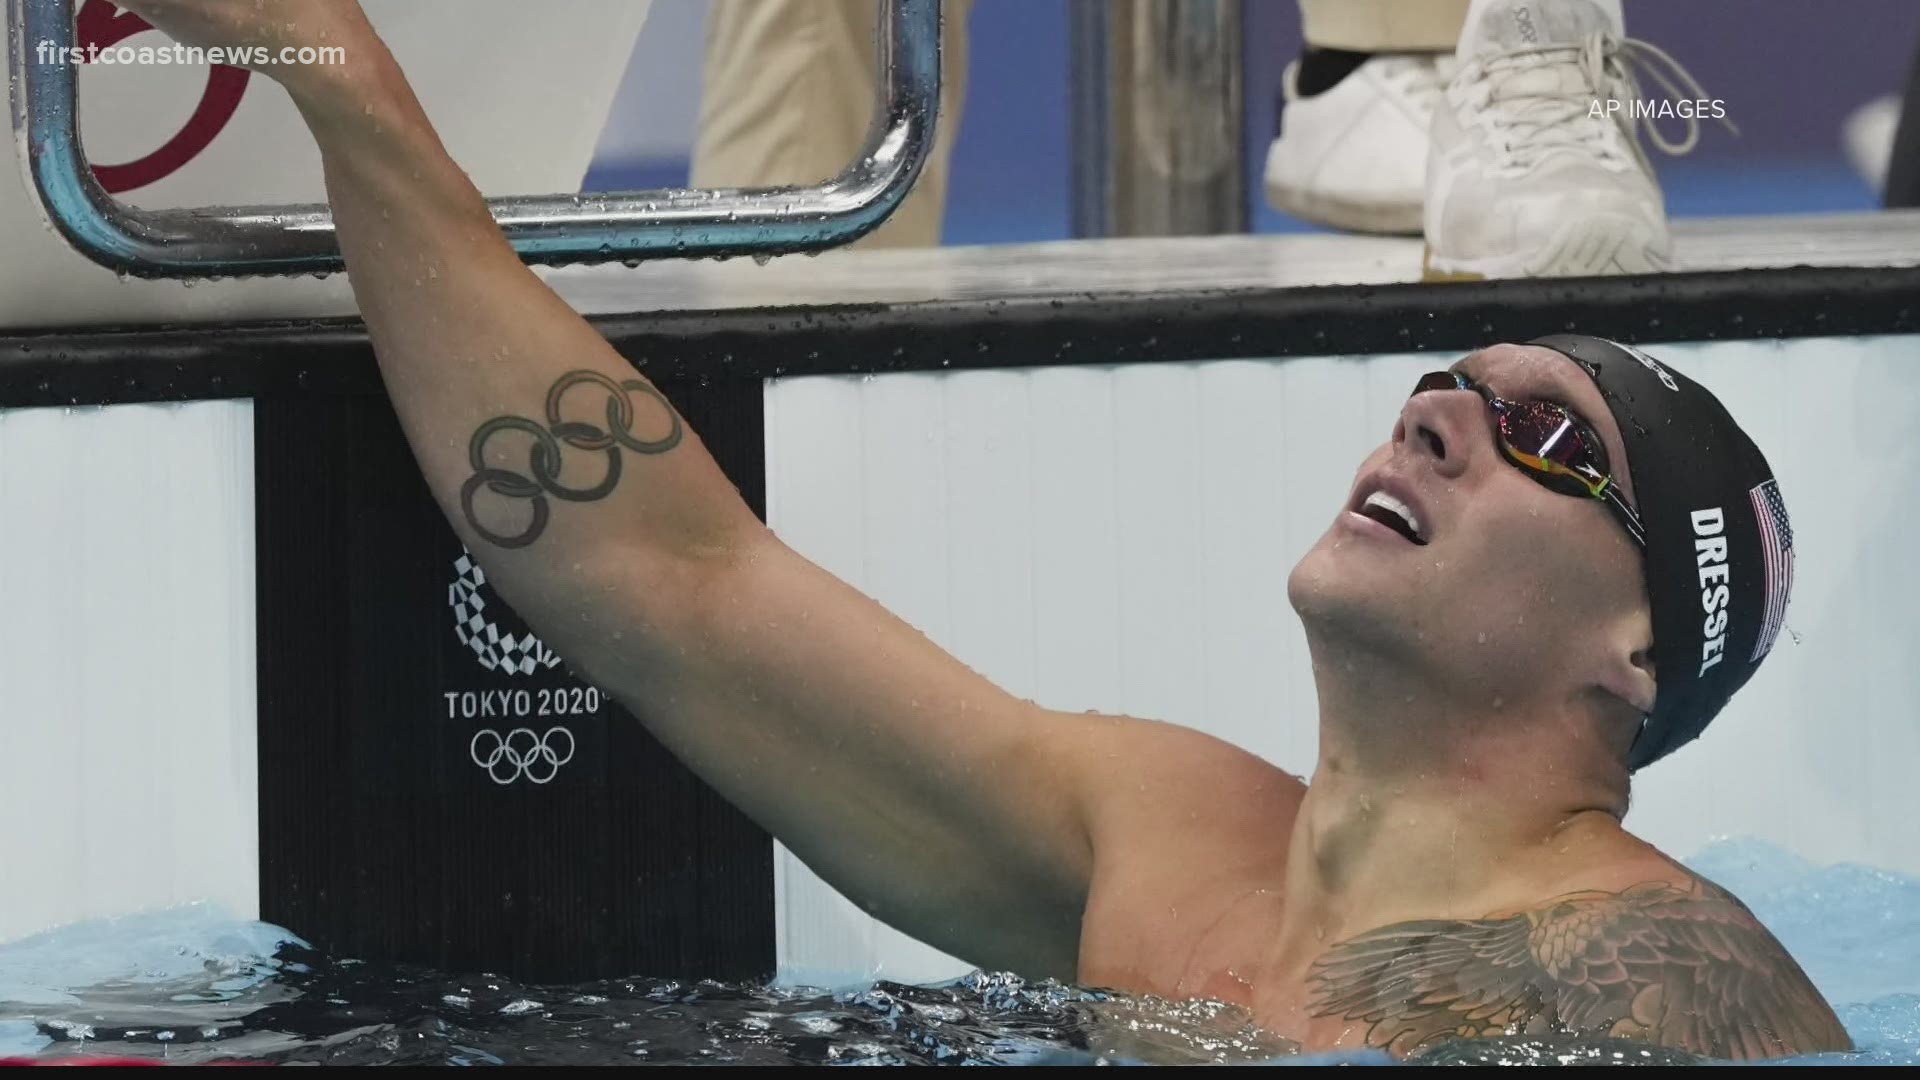 Dressel's previous three gold medals were in relays, including two gold medals in the 2016 Olympic Games in Rio de Janeiro.